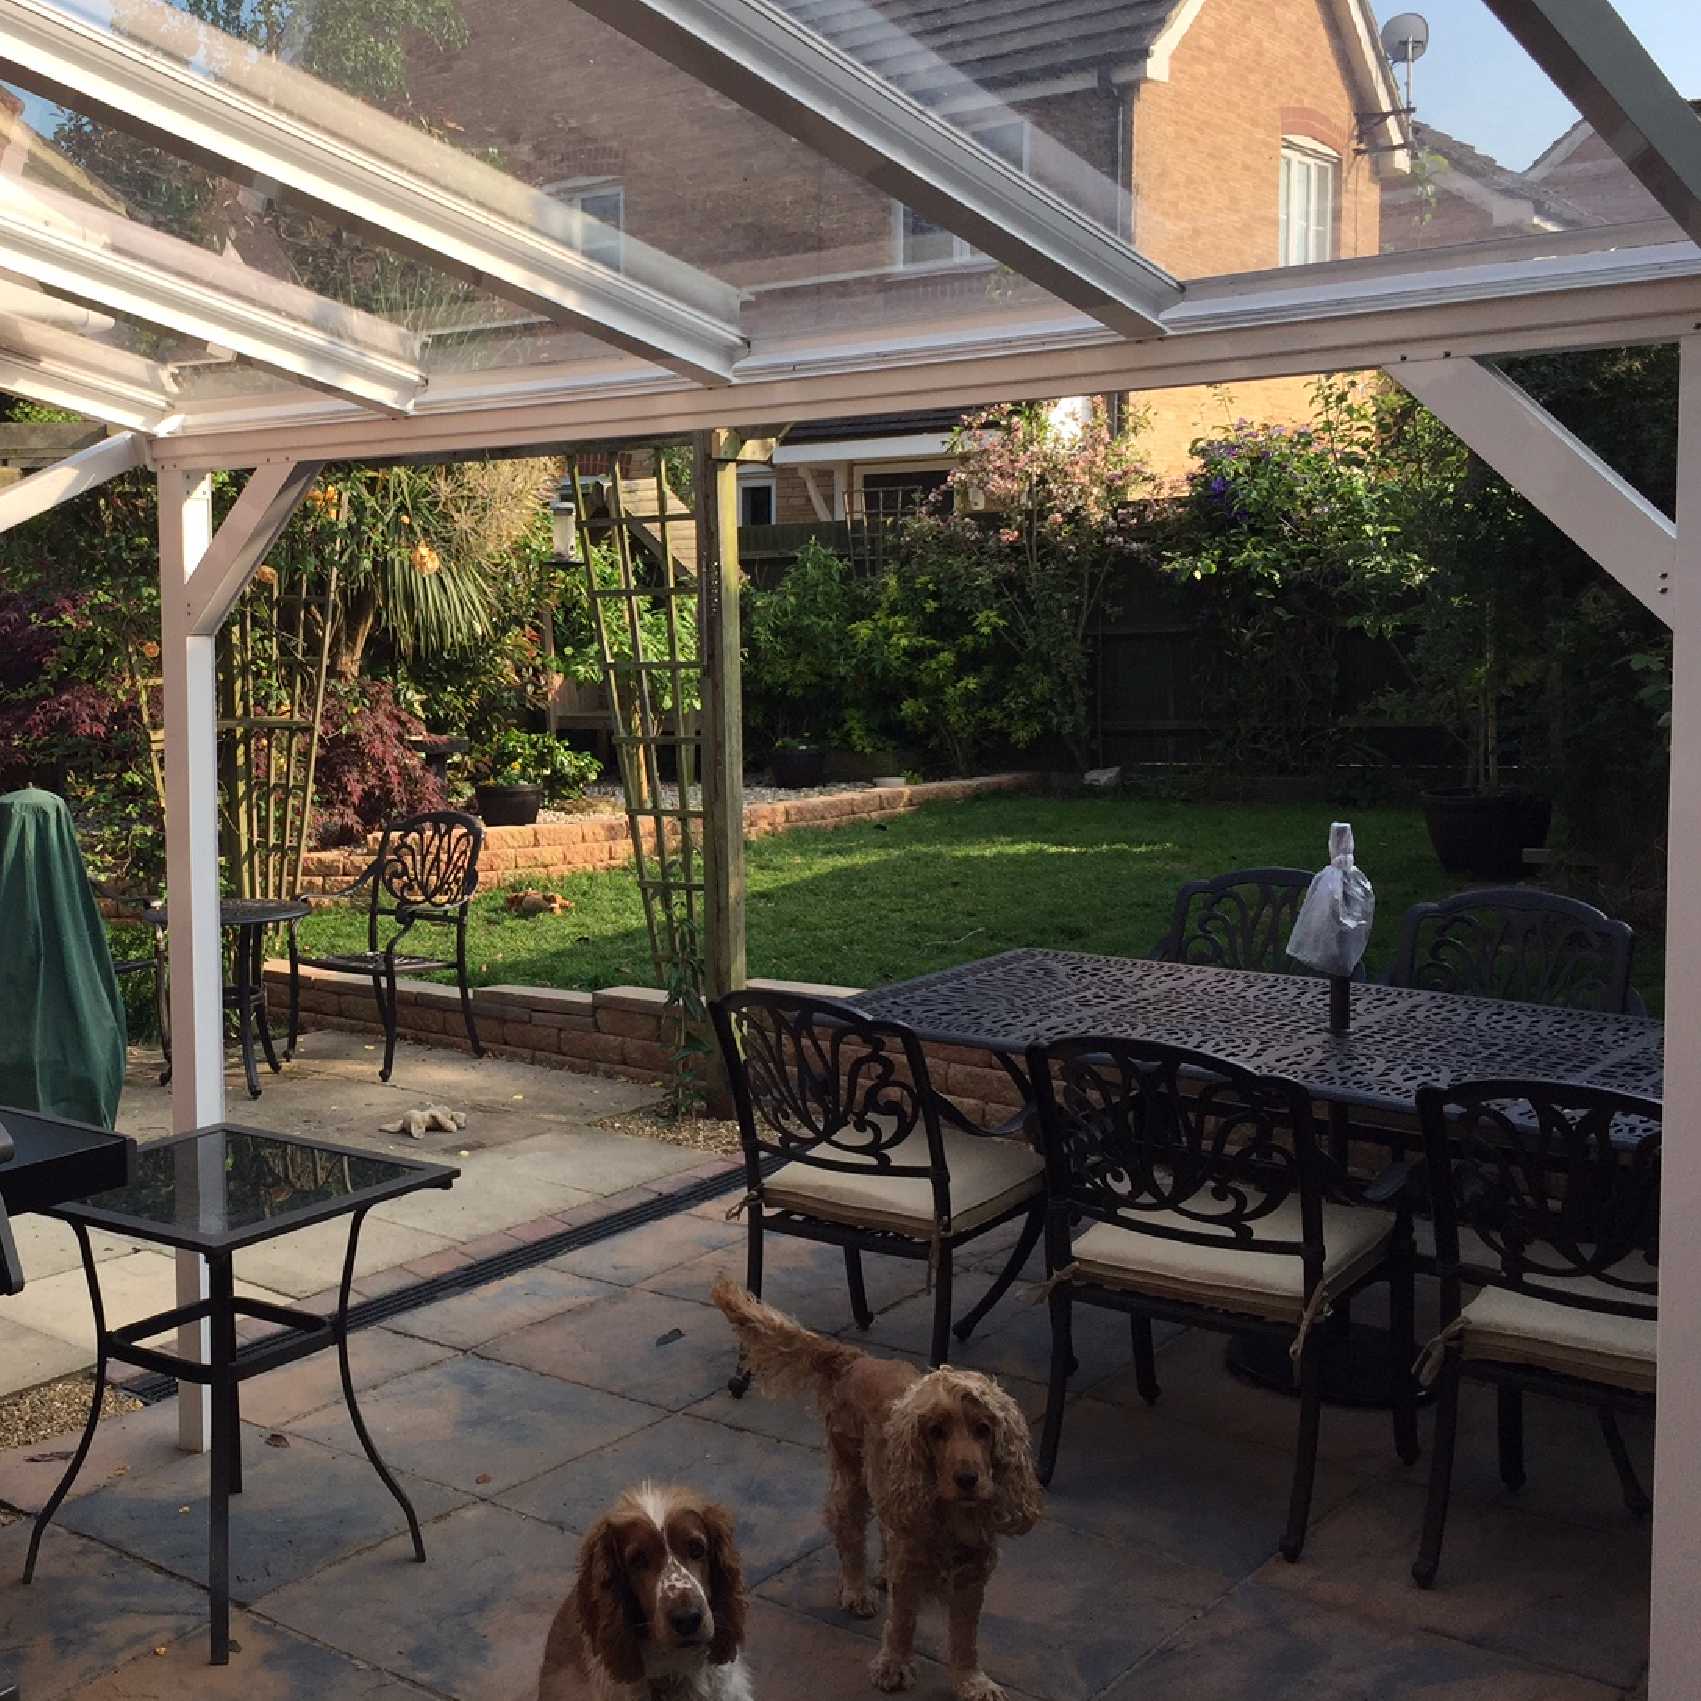 Affordable Omega Smart Lean-To Canopy, White UNGLAZED for 6mm Glazing - 10.5m (W) x 2.0m (P), (5) Supporting Posts